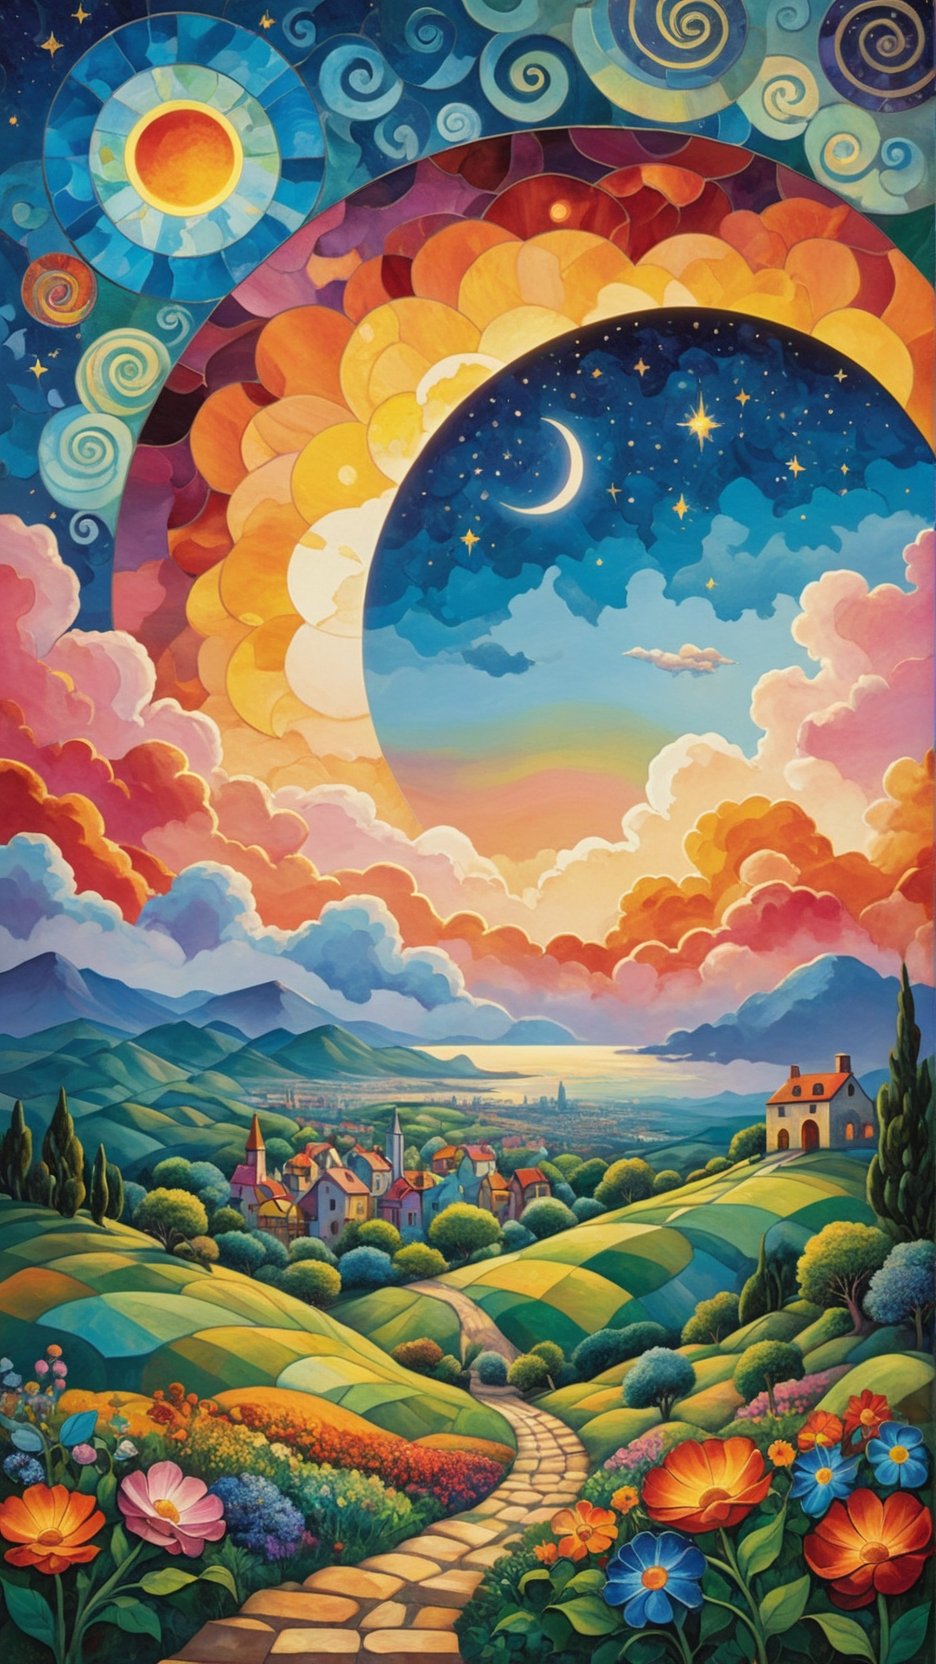 oil painting concept art, vibrant color, 

The Southern Star Atlas, (Teppei Sasakura style:1.5),  (Pointillism:1.3), (papercutting:1.2), cutout picture, (HDR:1.4), high contrast, intricately stained glass,

sunset, 1 Crescent moon, Cumulonimbus clouds with angel halo, a vibrant colorful stained glass clouds, (1 large stained glass sun flying in the sunset sky:1.3), Create a whimsical and vibrant flower garden townscape with colorful, fantastical buildings, many strange buildings, Many buildings stand on the slope of the hill ,?hill of a vibrant town, The color palette include vibrant warm colors with contrasting highlights and shadows to give depth, The brushwork is rough with clean lines for the buildings and more fluid strokes for the sky and water reflections, The overall art style evoke elements of surrealism mixed with folk art, Draw inspiration from artists like Marc Chagall for dreamlike scenes and Joan Miró for bold colors and shapes,

a image for a póster of psytrance festival, contains fractals, spiritual composition, the imagen evoke happiness and energy. the imagen contains organic textures and surreal composition. some parts of the image evoke a las trip,